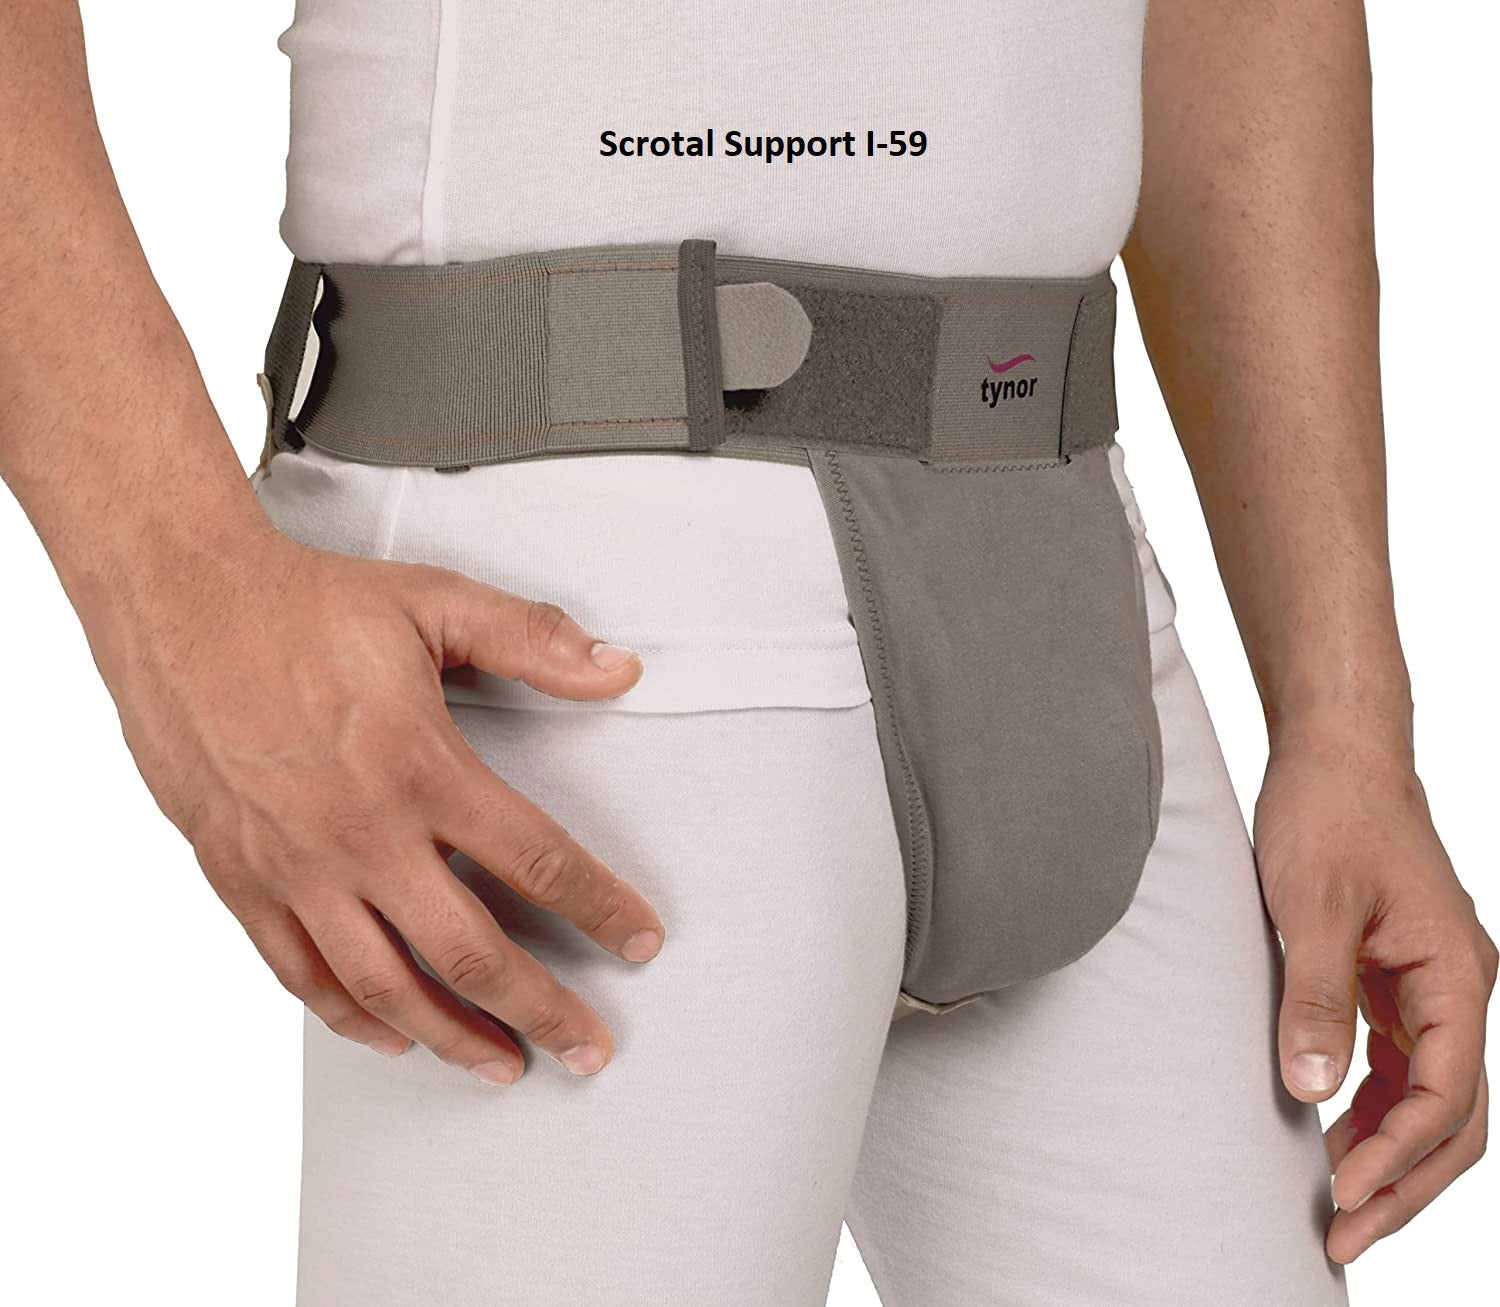 Tynor Scrotal Support (Gray) I-59